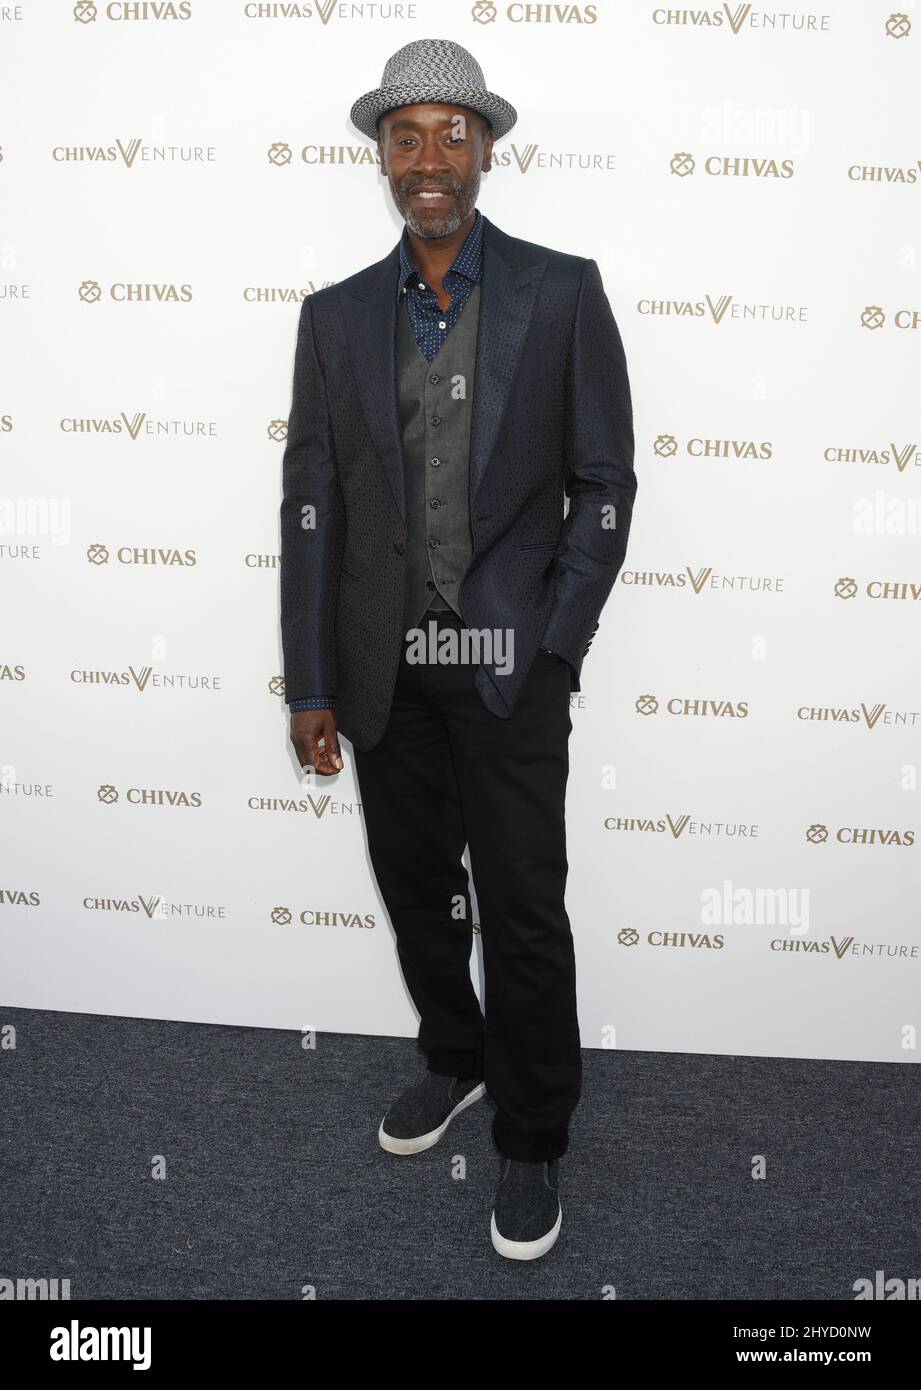 Don Cheadle attending The Final Pitch from Chivas' The Venture held at the LADC Studios, in Los Angeles, California Stock Photo